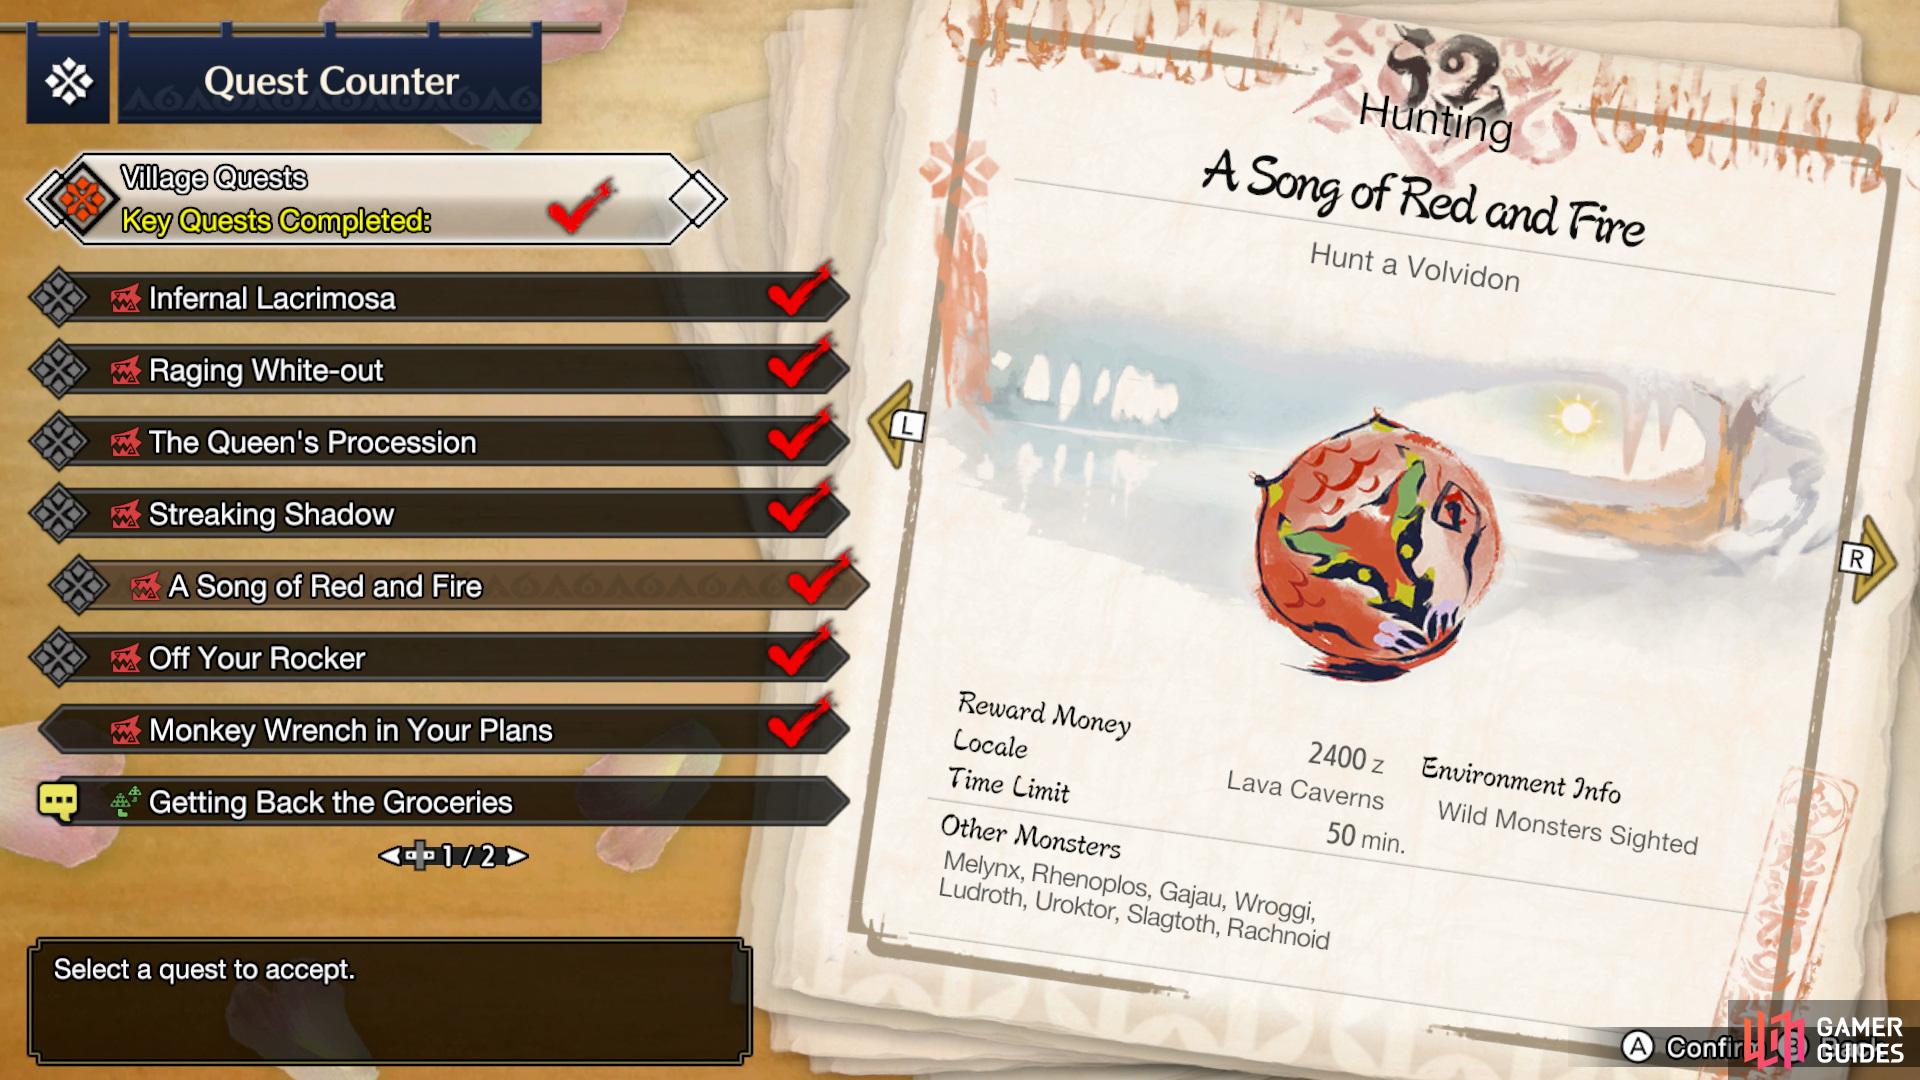 The A Song of Red and Fire quest becomes available when you reach 4* Village Quests